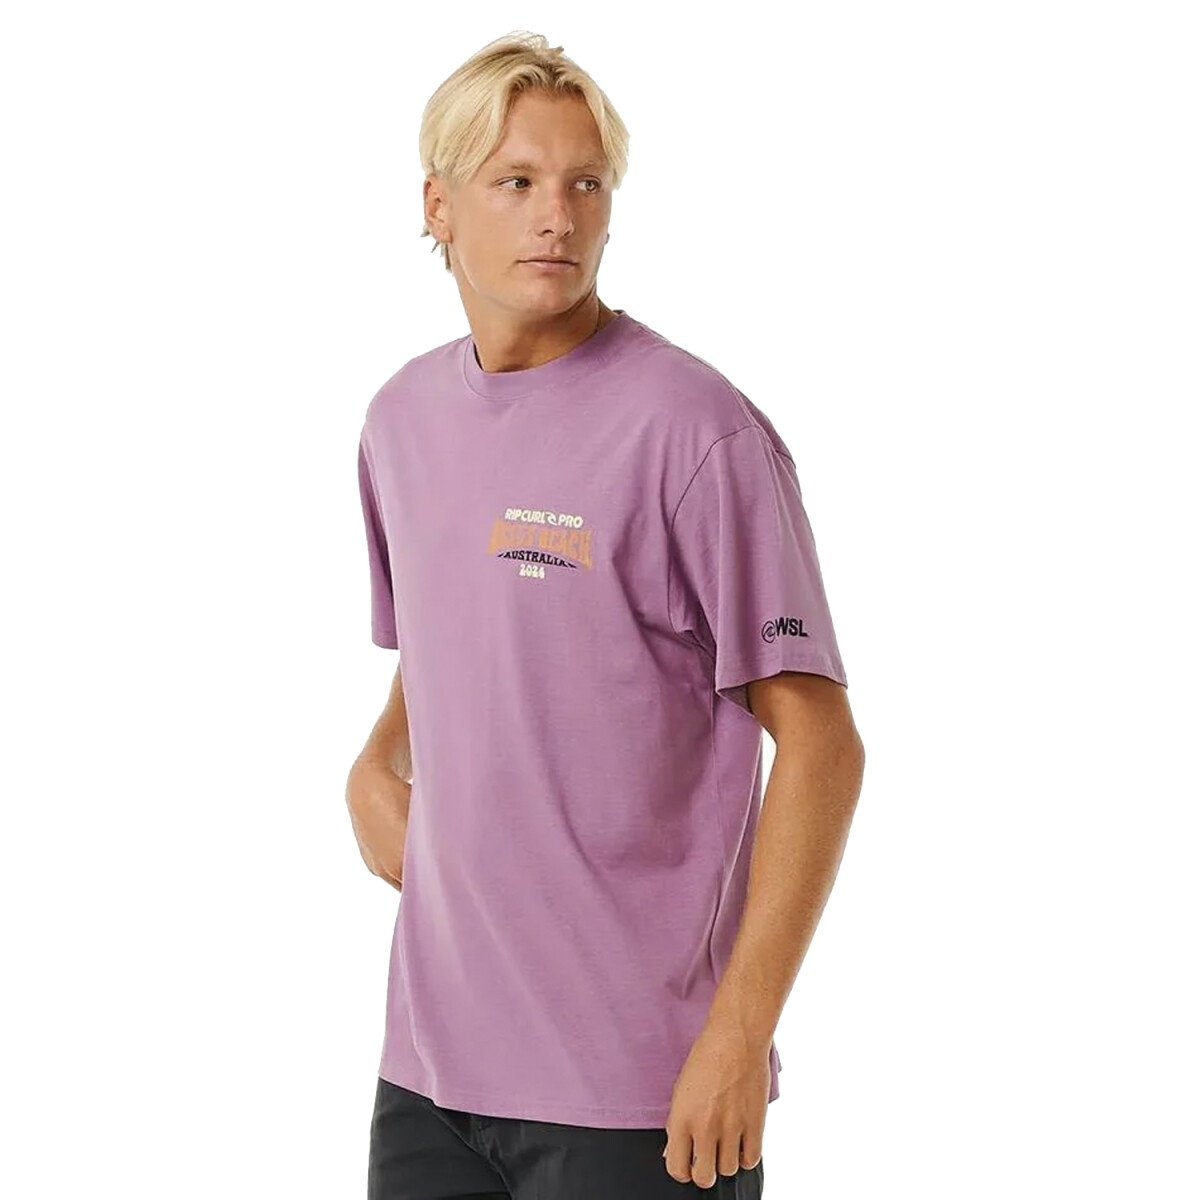 Remera Rip Curl Rip Curl Pro 24 Line Up Tee 